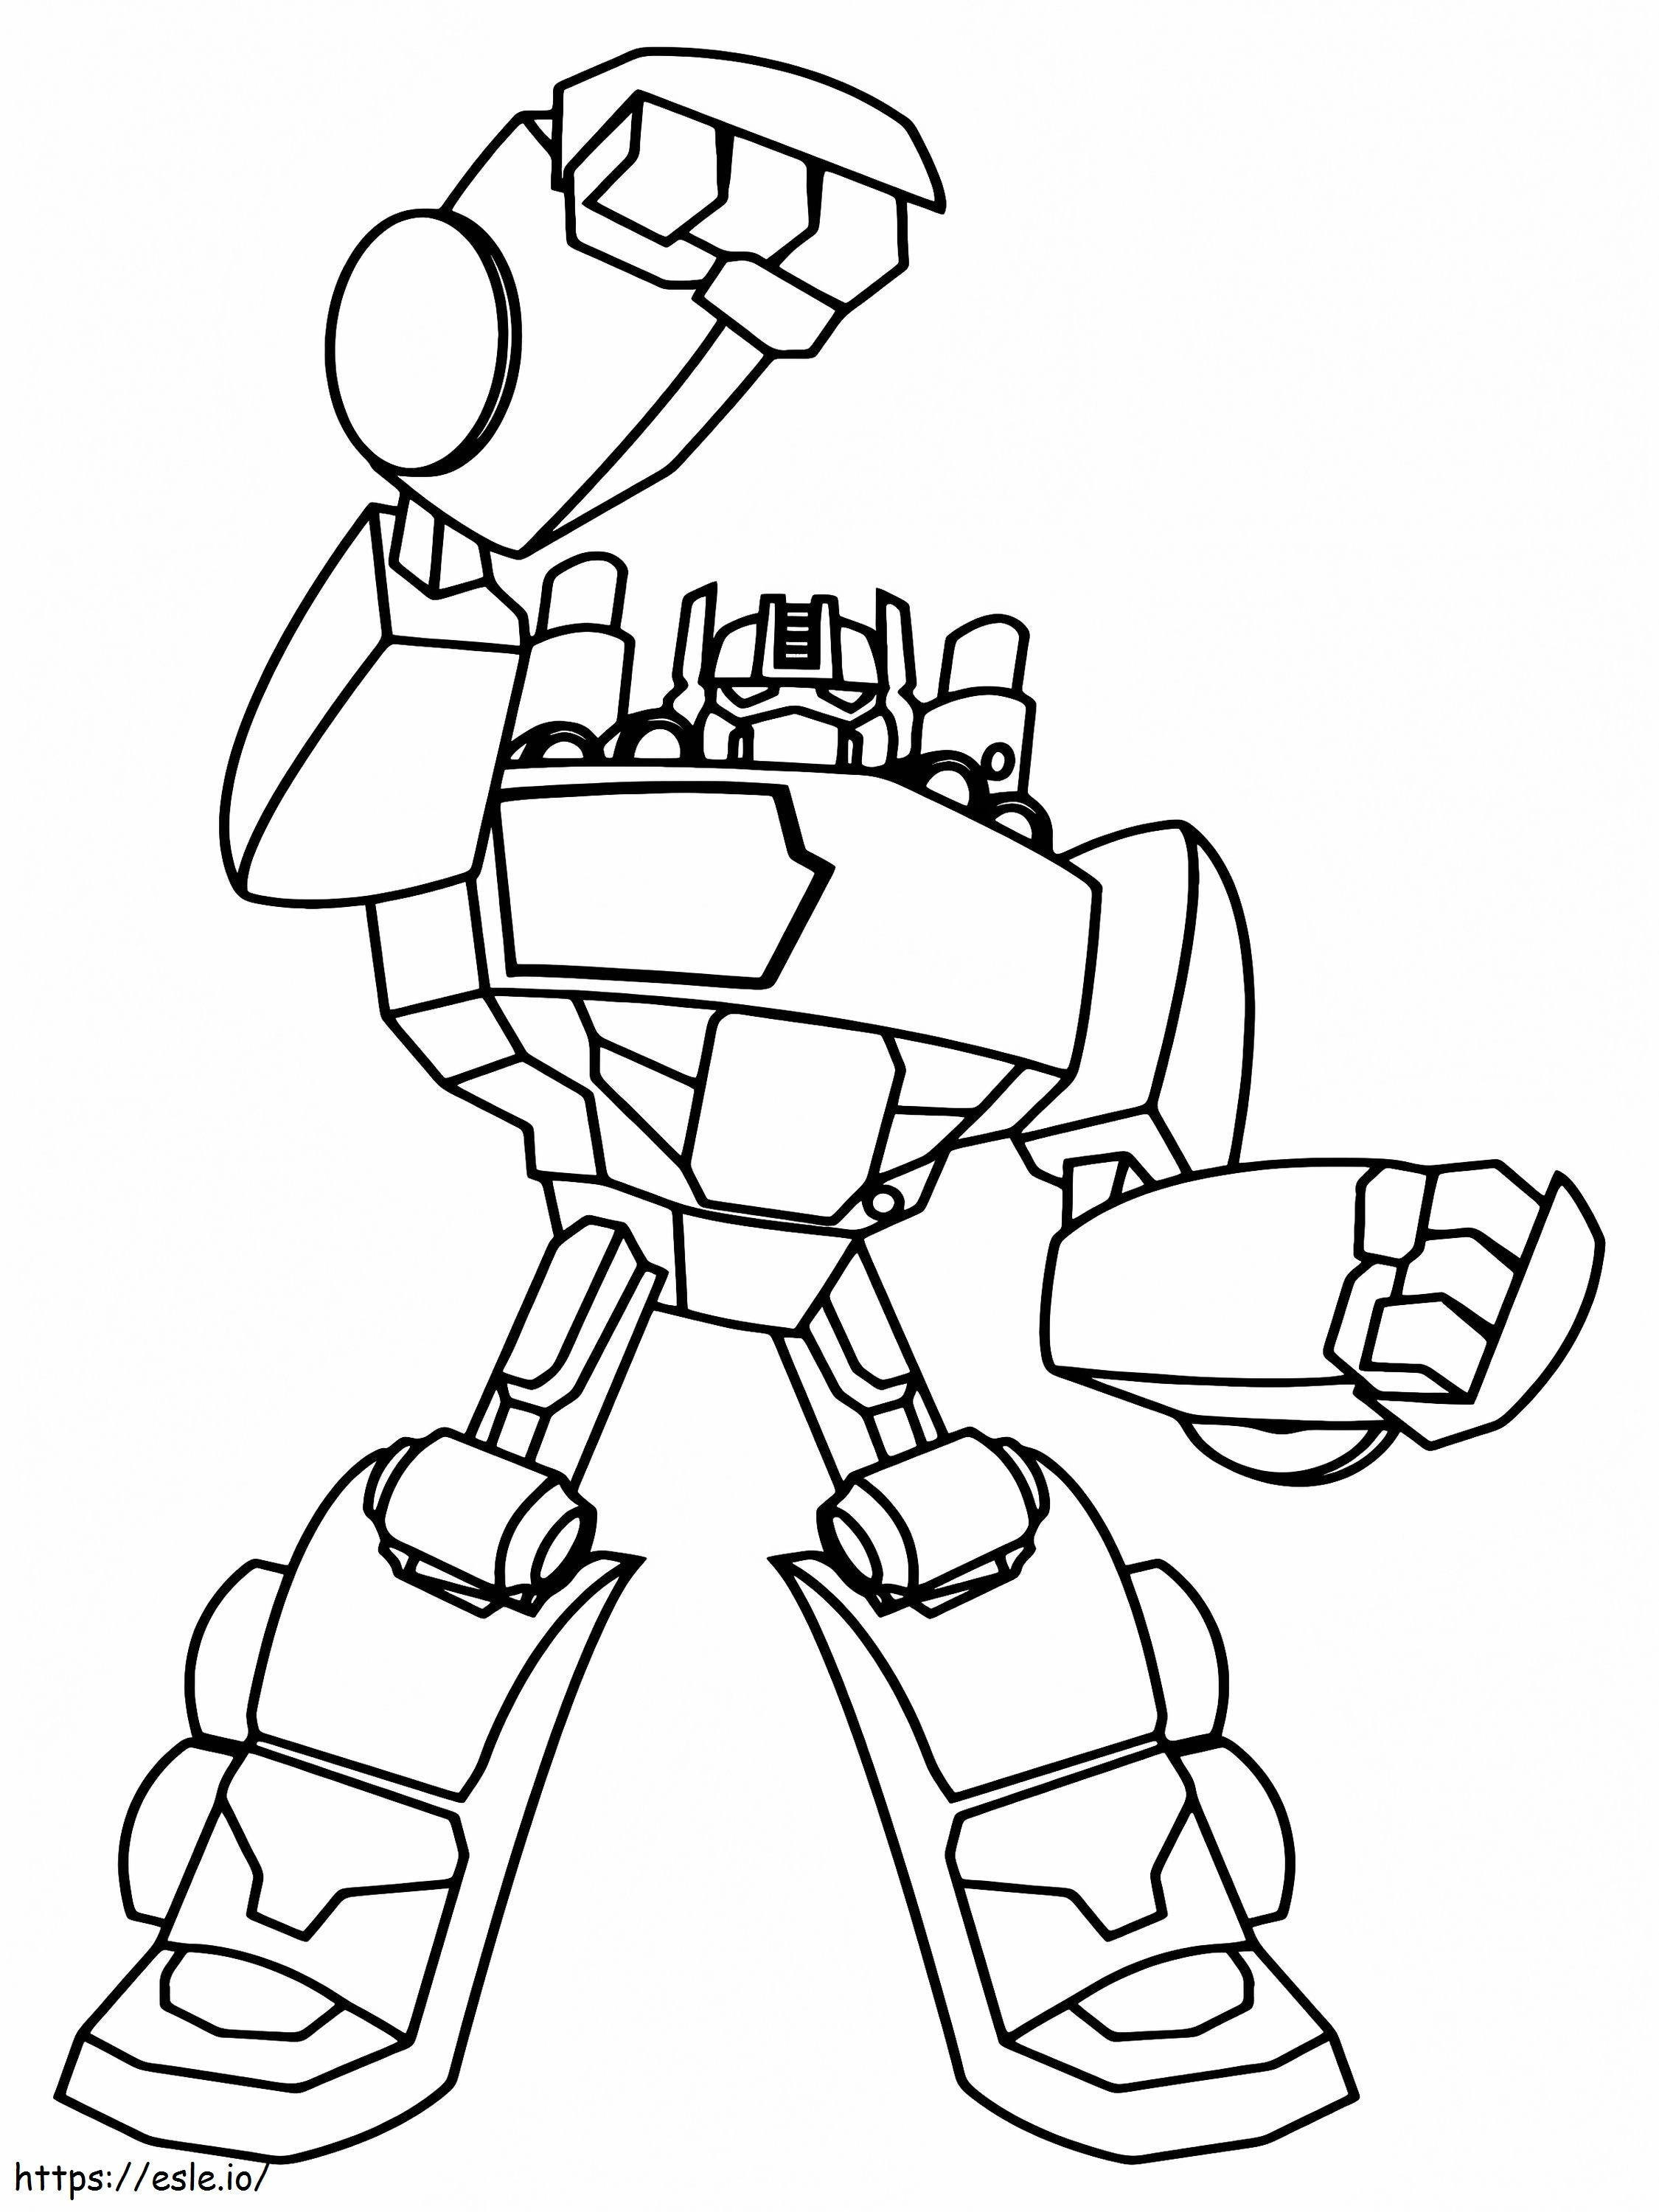 Brave Bumblebee coloring page